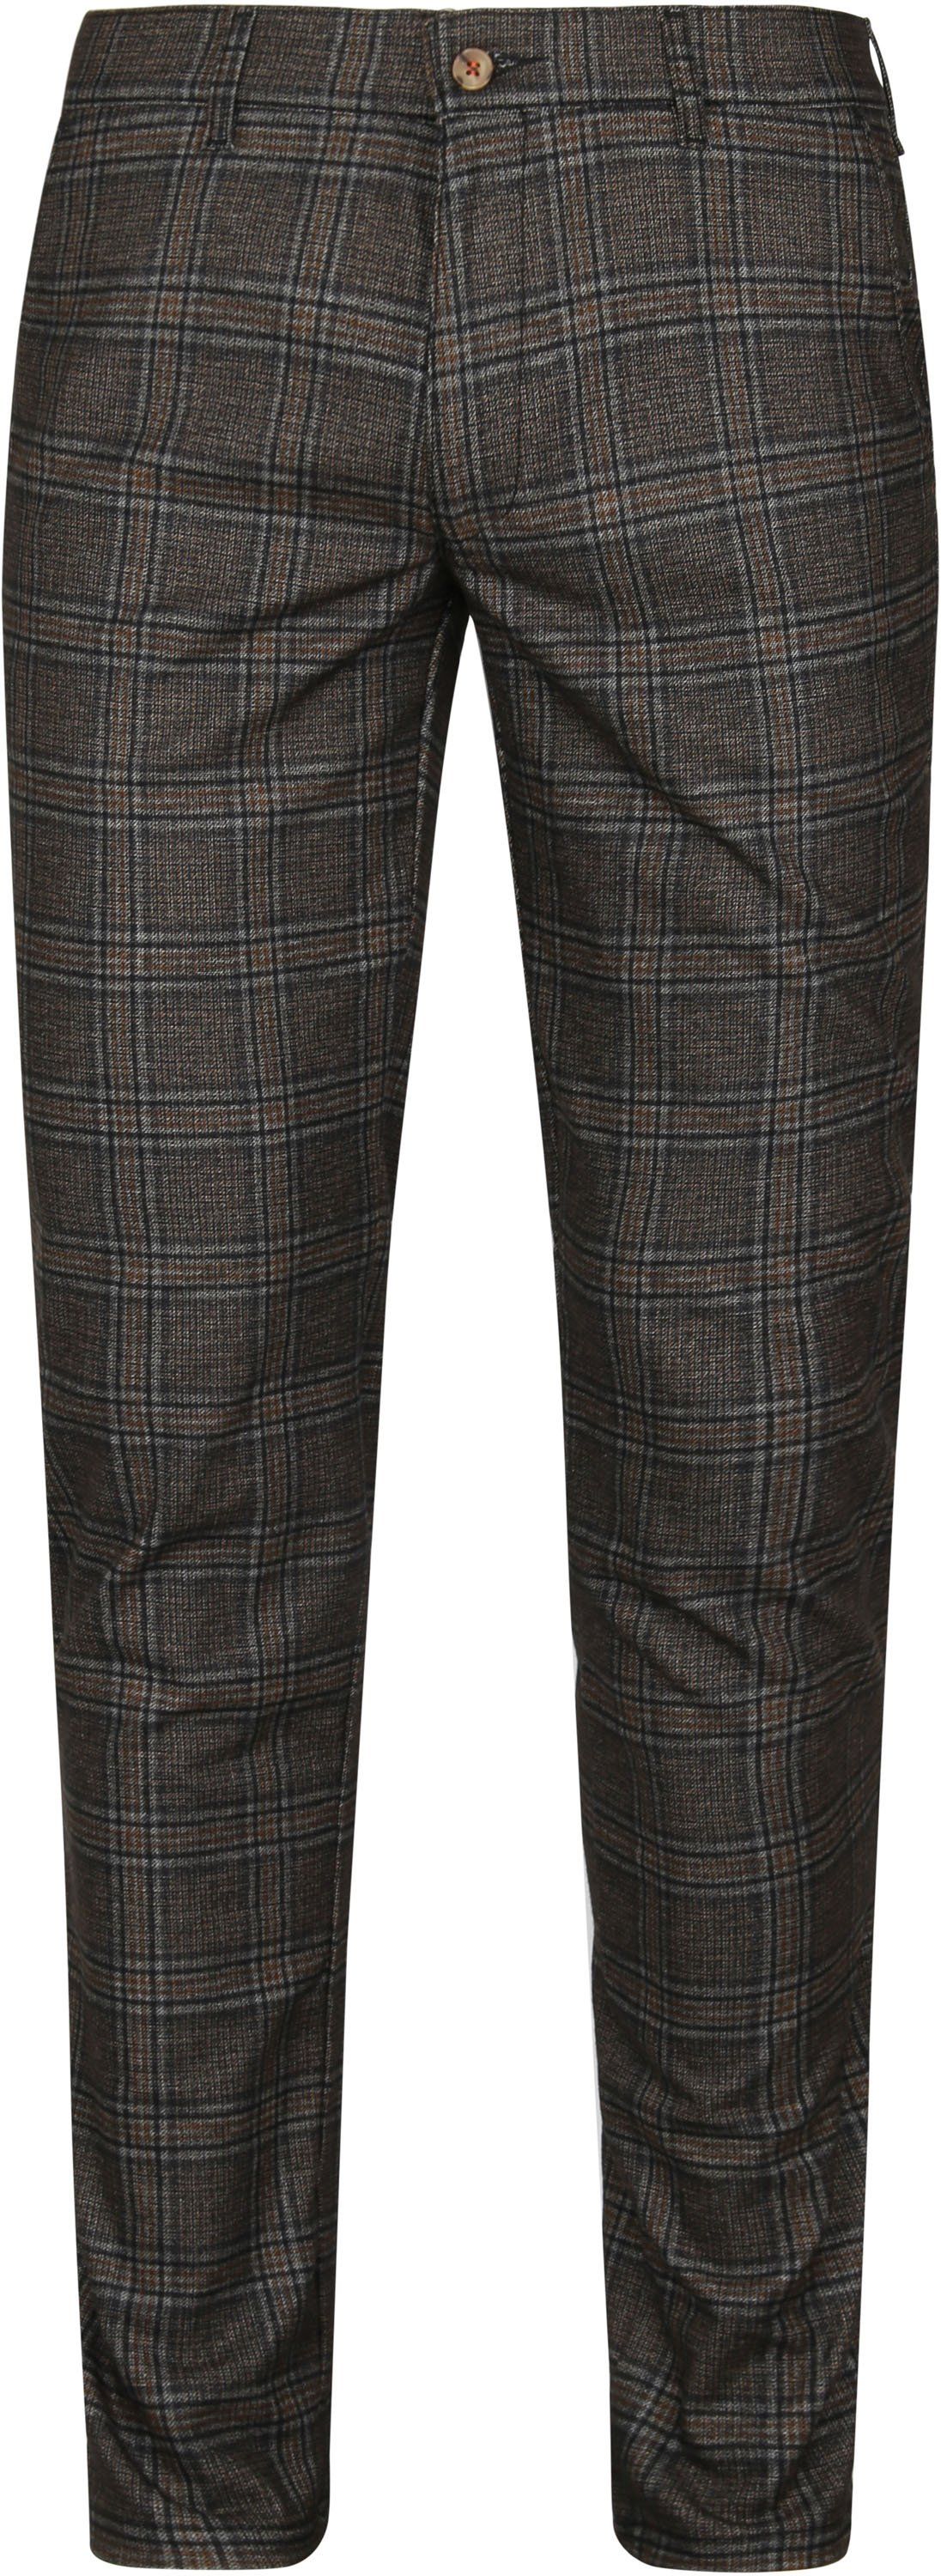 Suitable Chino Pico Checkered Brown size W 31